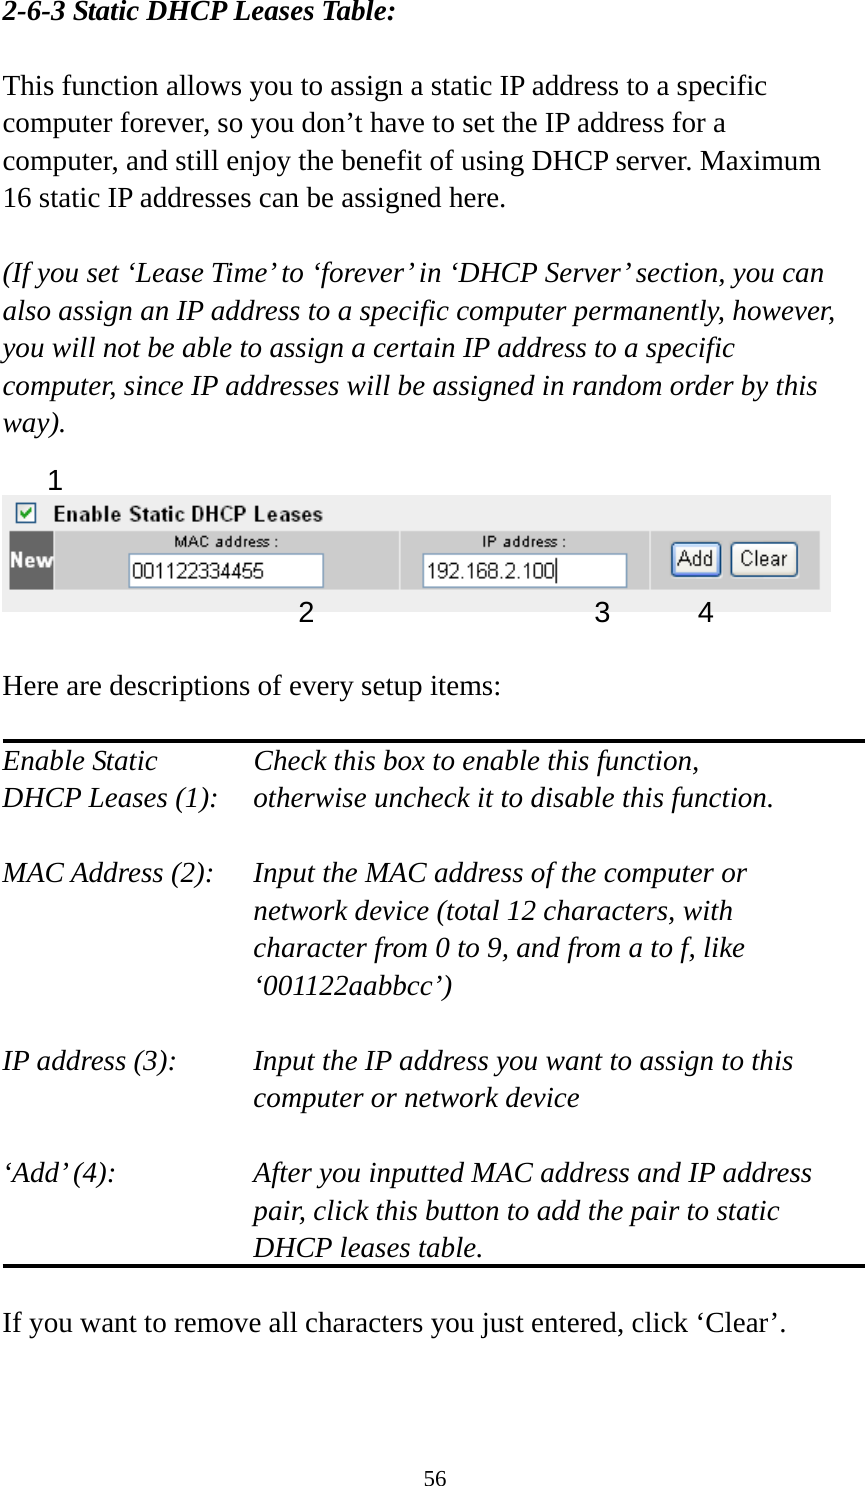 56 2-6-3 Static DHCP Leases Table:  This function allows you to assign a static IP address to a specific computer forever, so you don’t have to set the IP address for a computer, and still enjoy the benefit of using DHCP server. Maximum 16 static IP addresses can be assigned here.  (If you set ‘Lease Time’ to ‘forever’ in ‘DHCP Server’ section, you can also assign an IP address to a specific computer permanently, however, you will not be able to assign a certain IP address to a specific computer, since IP addresses will be assigned in random order by this way).     Here are descriptions of every setup items:  Enable Static      Check this box to enable this function, DHCP Leases (1):    otherwise uncheck it to disable this function.  MAC Address (2):    Input the MAC address of the computer or network device (total 12 characters, with character from 0 to 9, and from a to f, like ‘001122aabbcc’)   IP address (3):    Input the IP address you want to assign to this computer or network device    ‘Add’ (4):    After you inputted MAC address and IP address pair, click this button to add the pair to static DHCP leases table.  If you want to remove all characters you just entered, click ‘Clear’.   1 2 3 4 